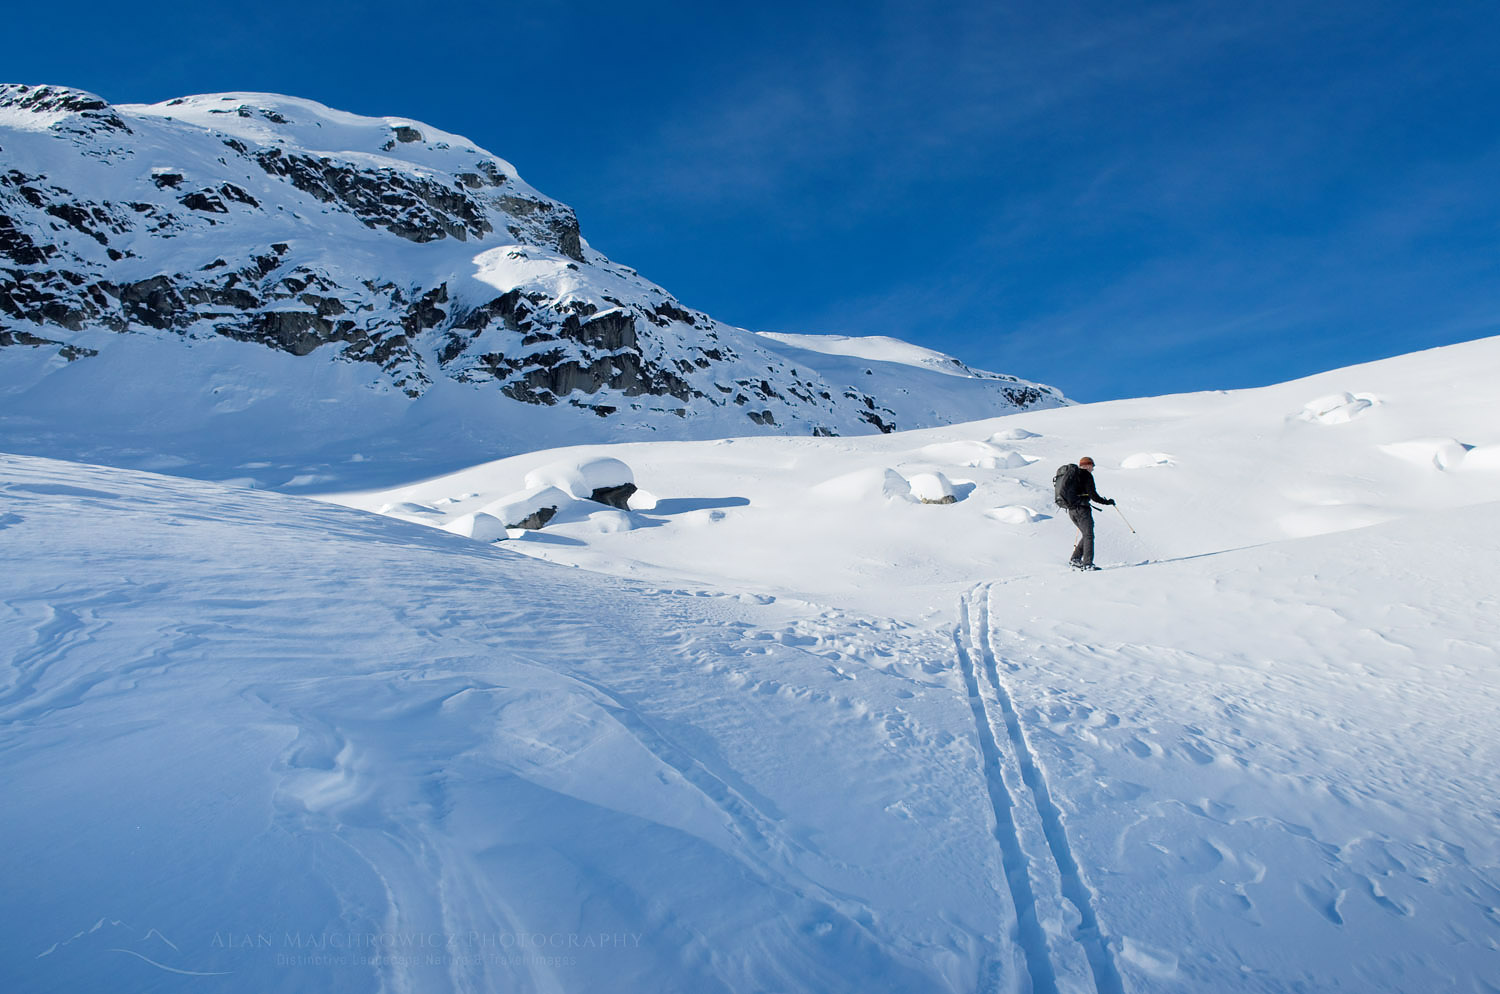 Backcountry ski touring in Upper Marriott Basin in winter, Coast Mountains British Columbia #50337